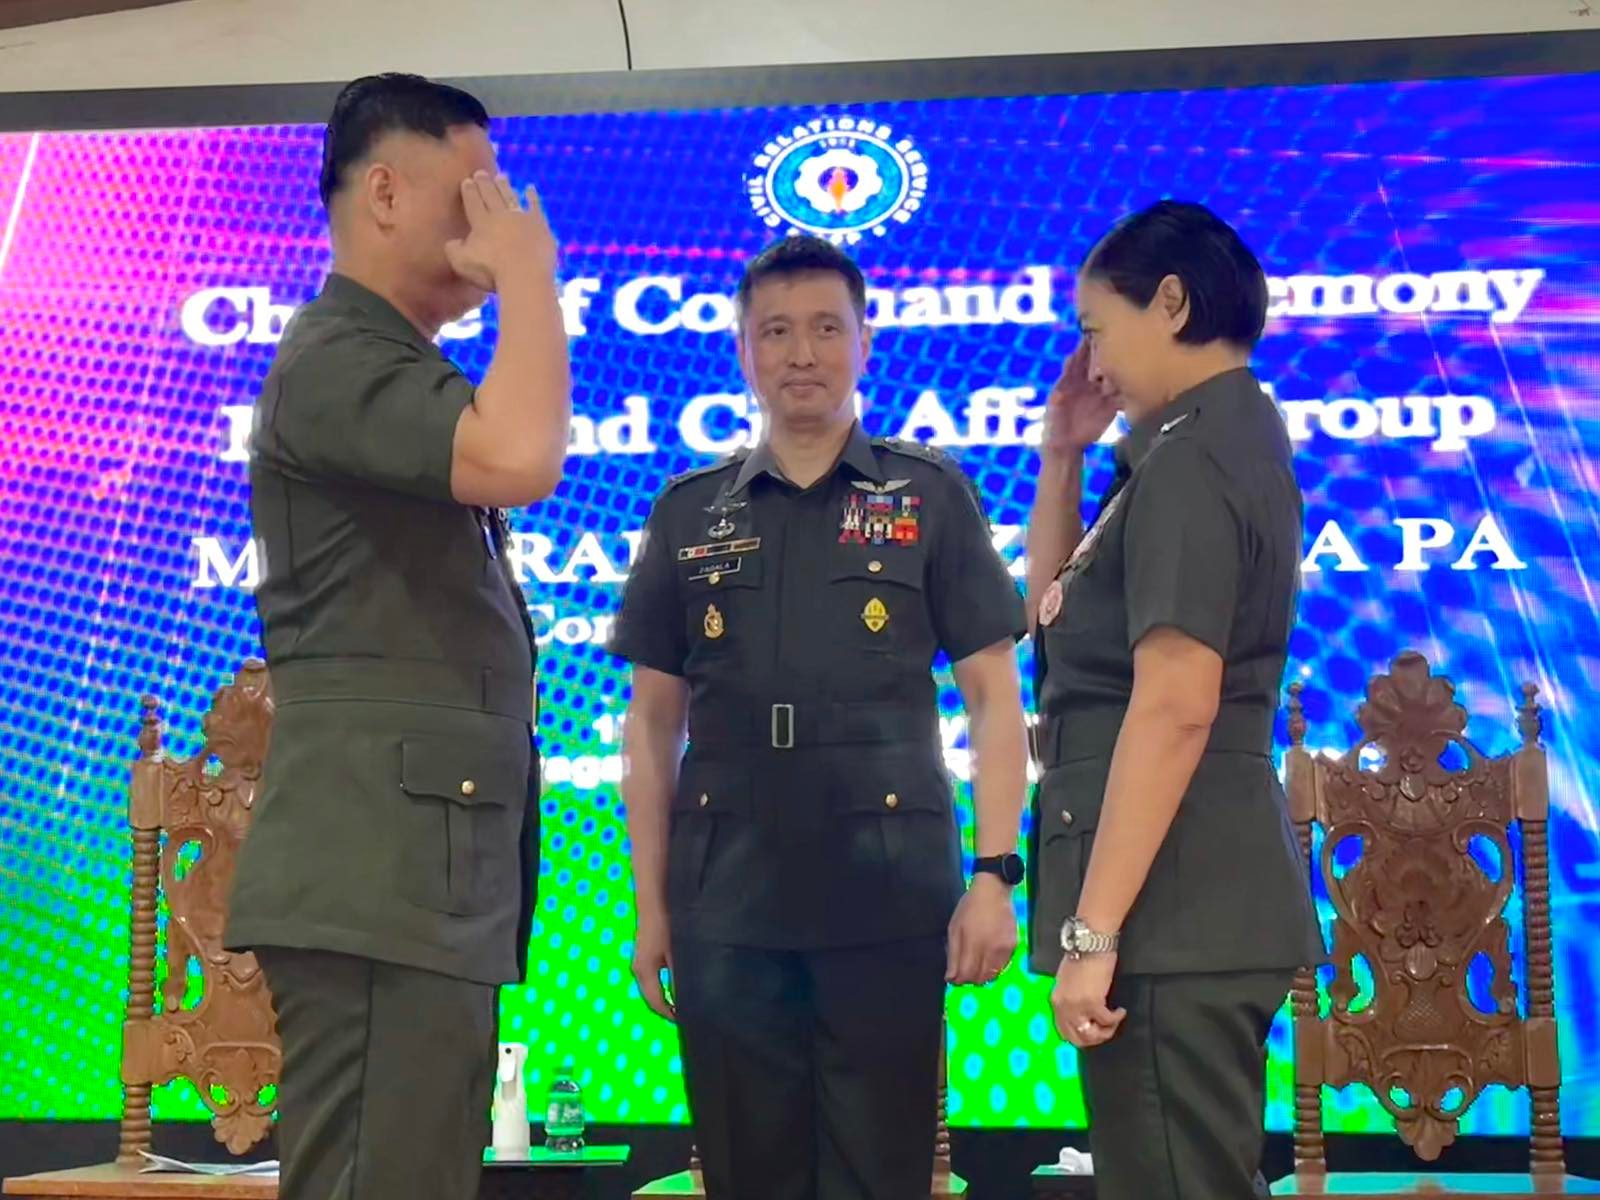 AFP’s first woman spox: Cyber expert with presidential security experience  